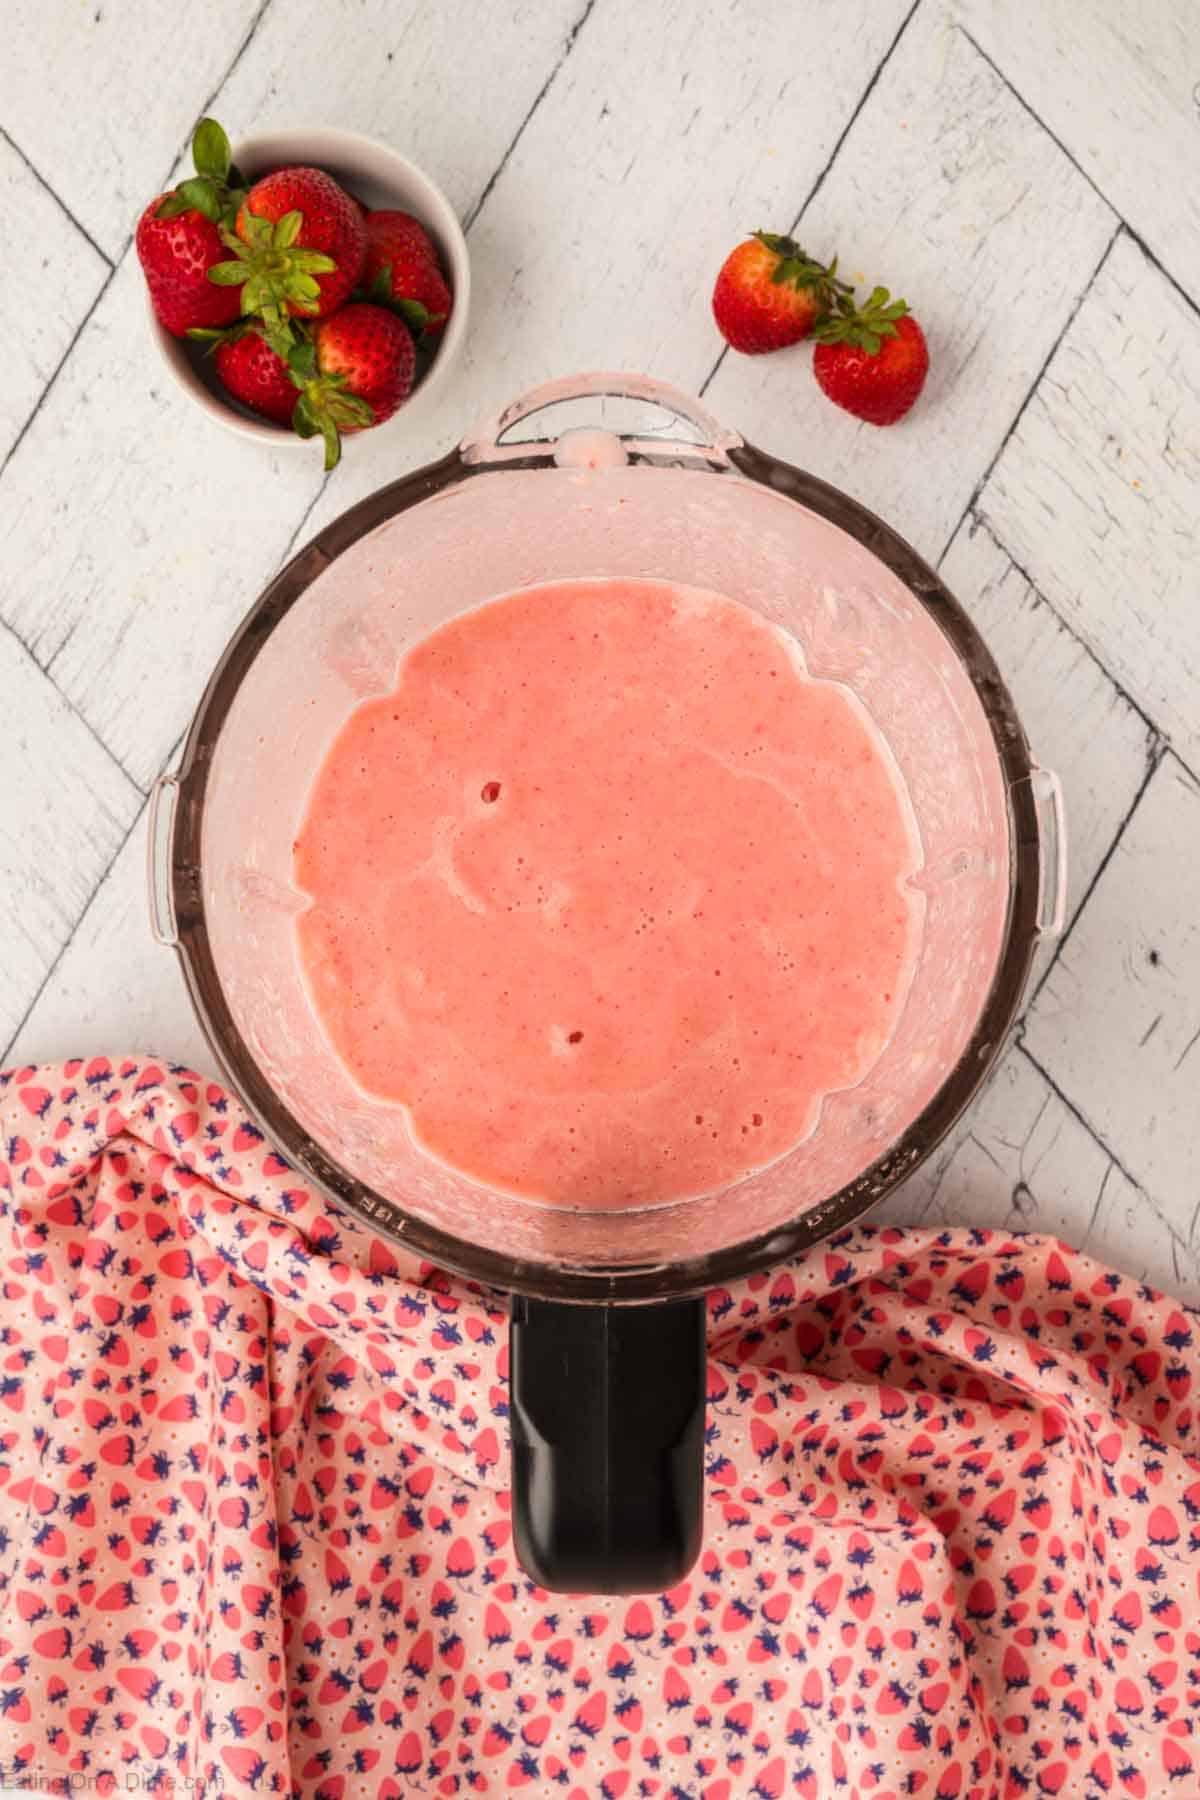 Smoothie blended in the blender with a bowl of fresh strawberries on the side